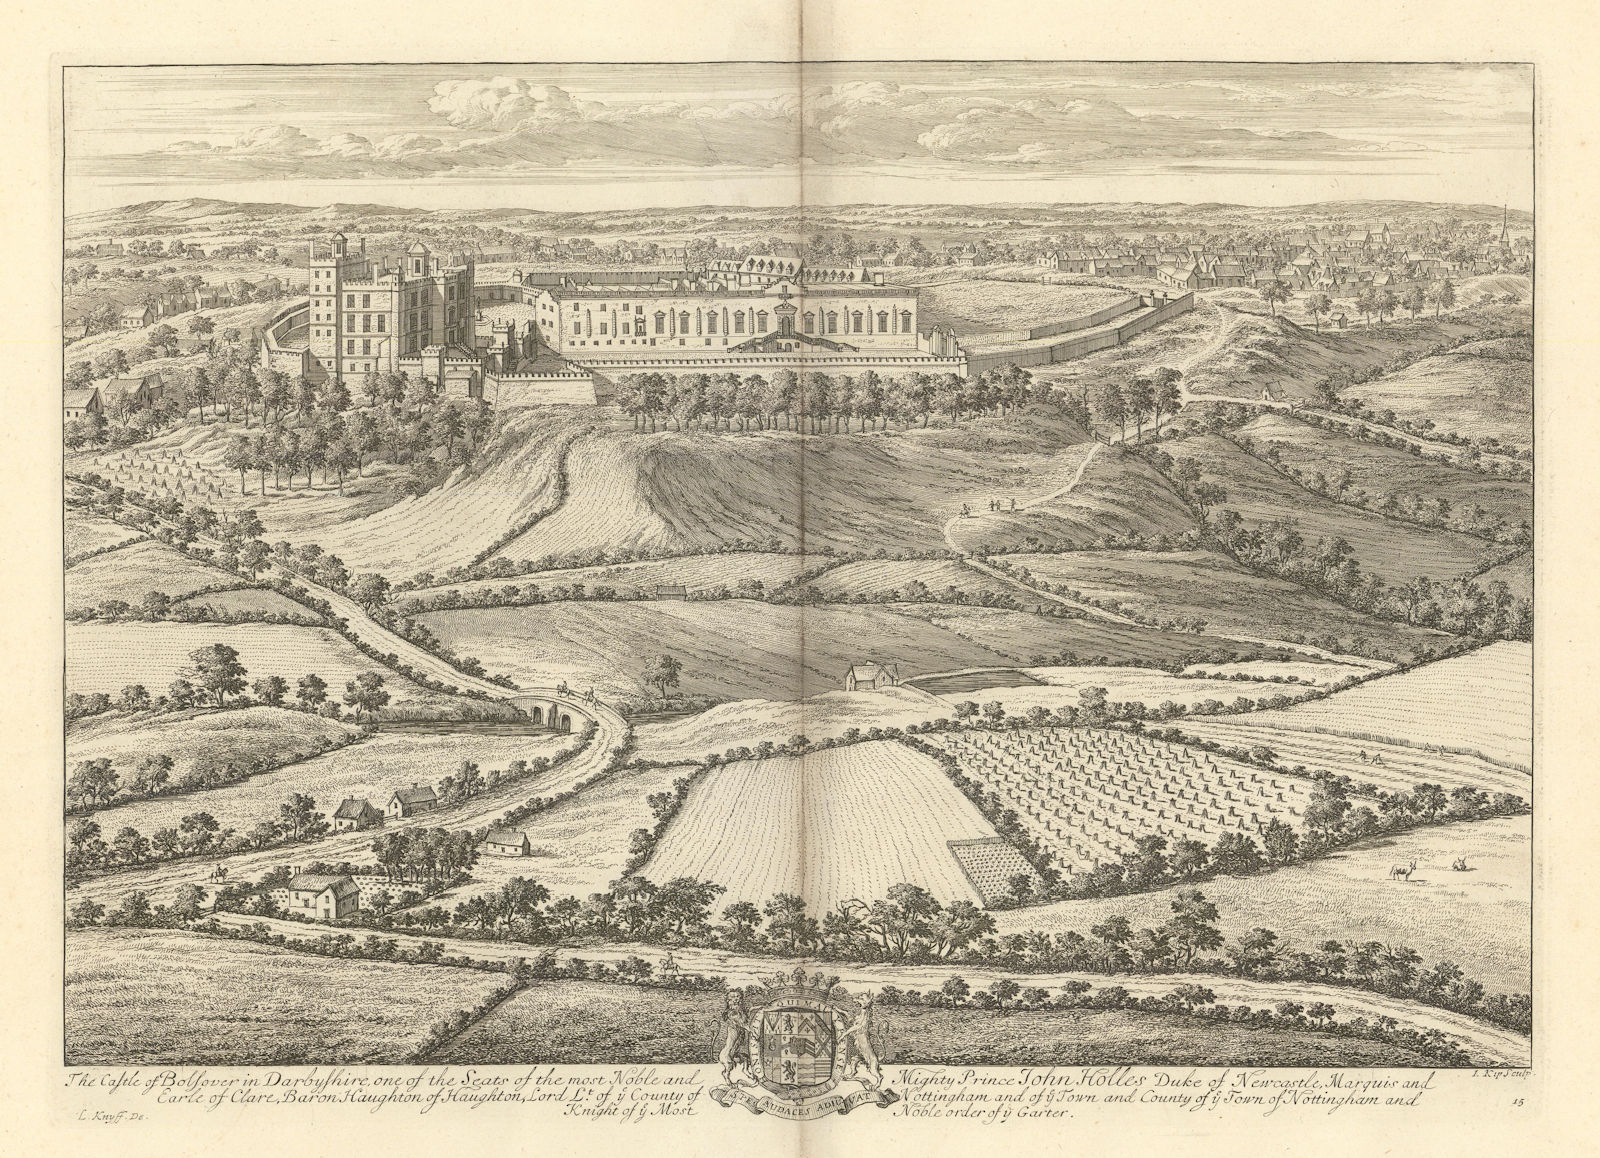 Associate Product Bolsover Castle by Kip & Knyff. "The Castle of Bolsover in Darbyshire" 1709